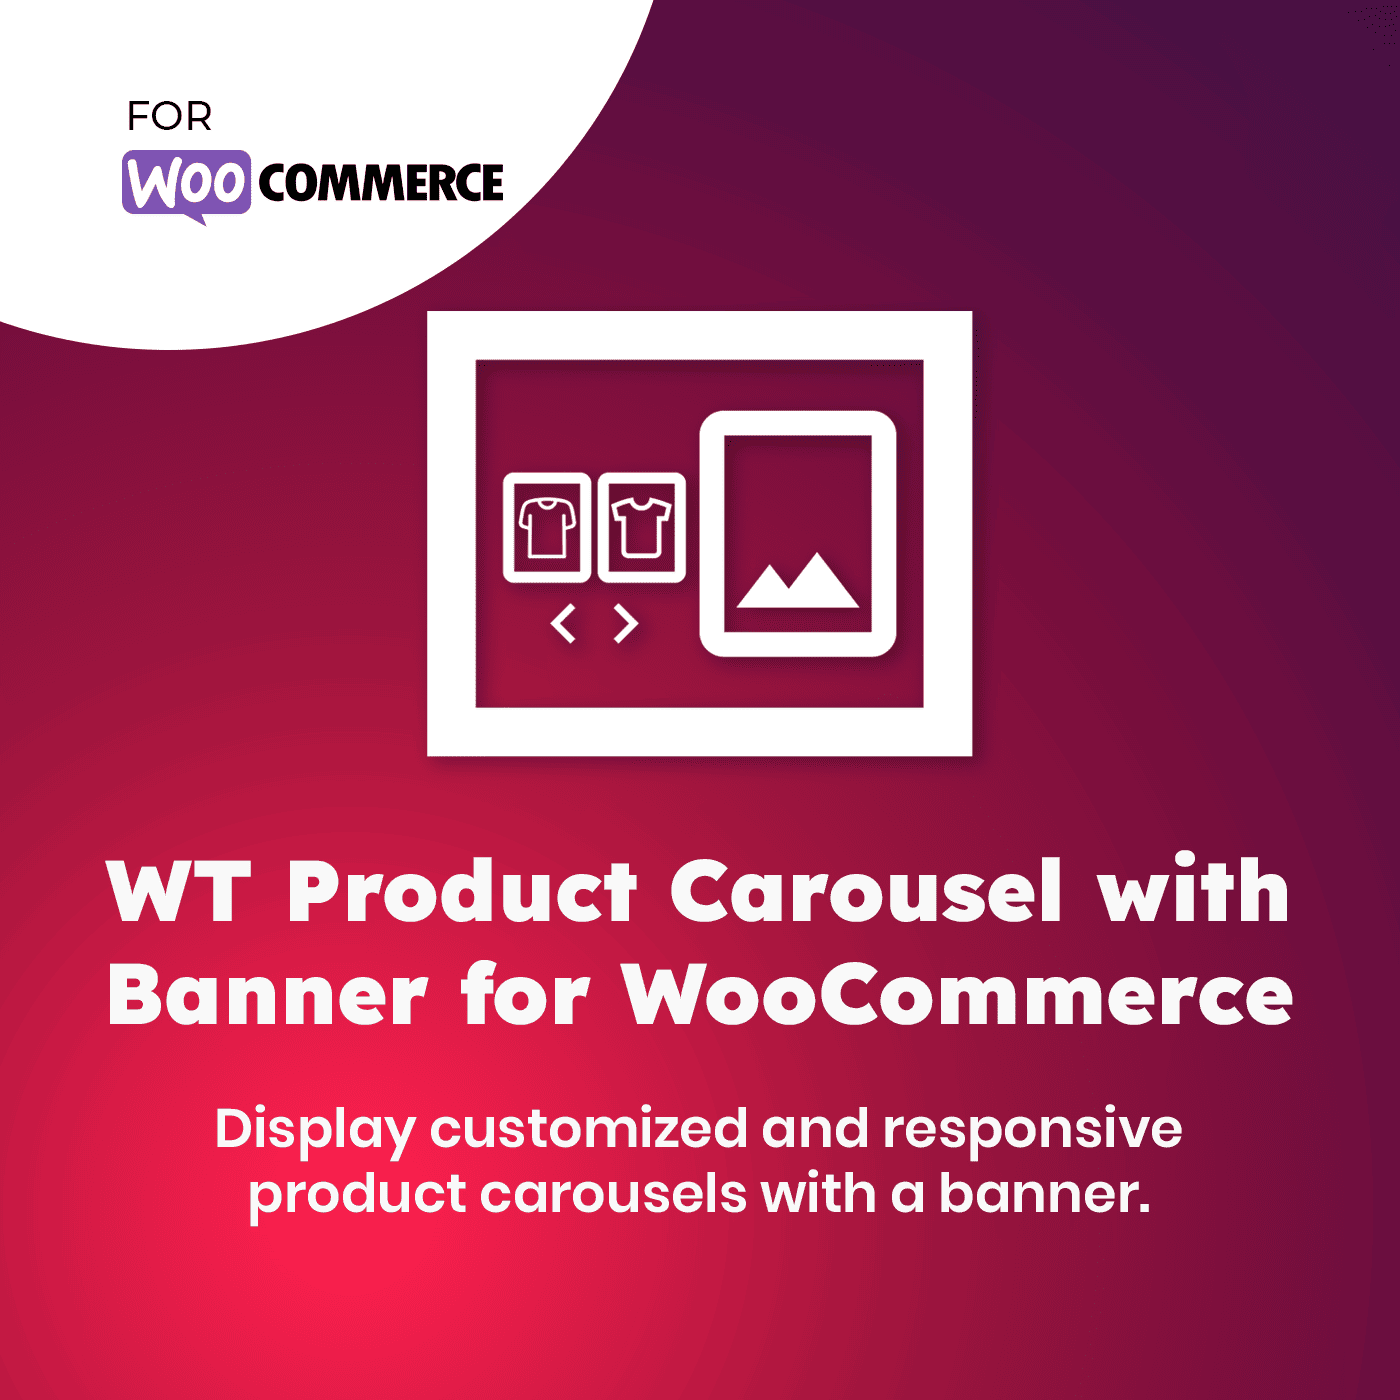 WT Product Carousel with Banner for WooCommerce - WordPress Plugin for WooCommerce